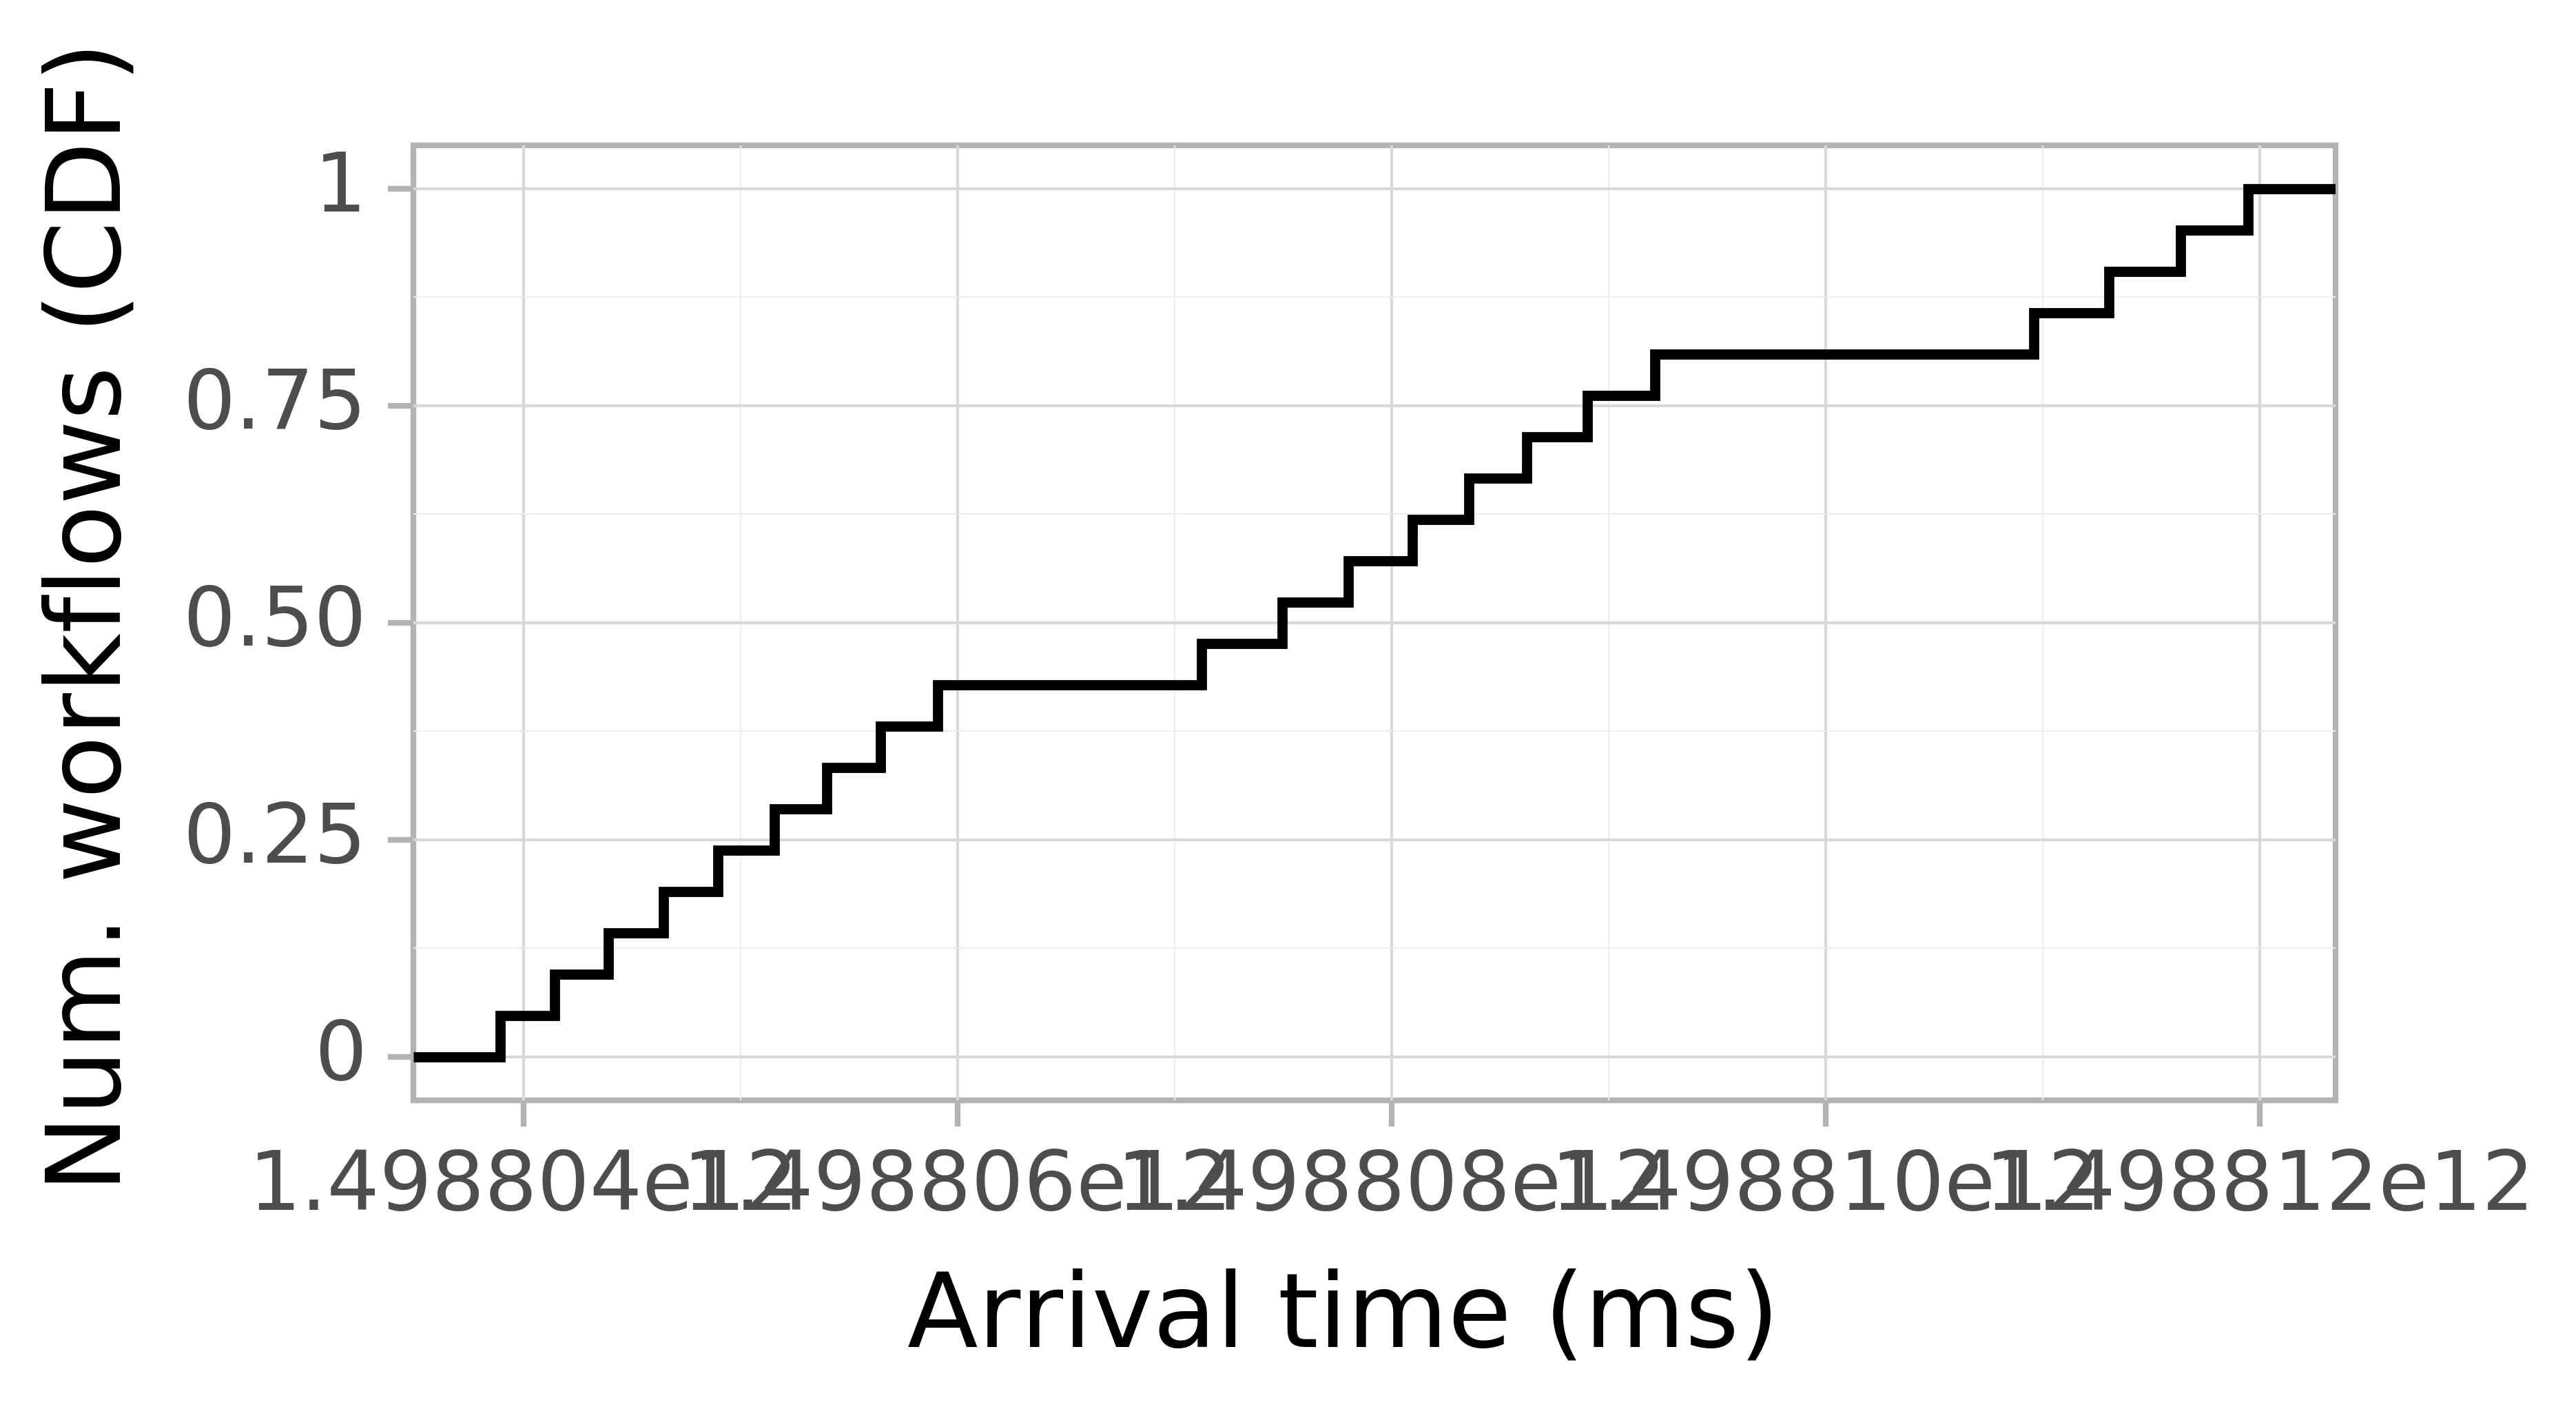 Job arrival CDF graph for the askalon-new_ee32 trace.